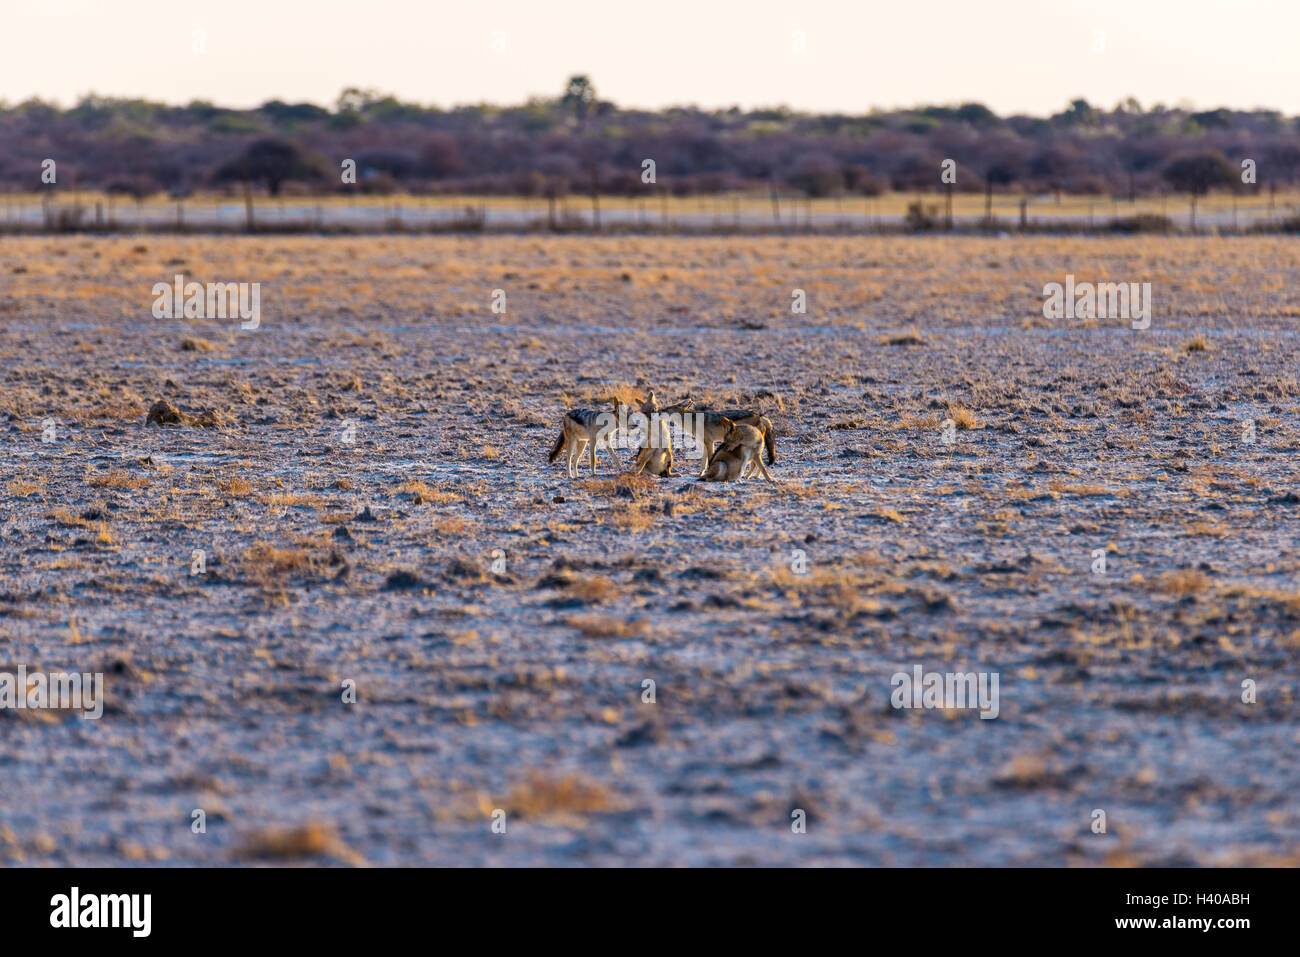 Group of Black Backed Jackals on the desert pan at sunset. Etosha National Park, the main travel destination in Namibia, Africa. Stock Photo